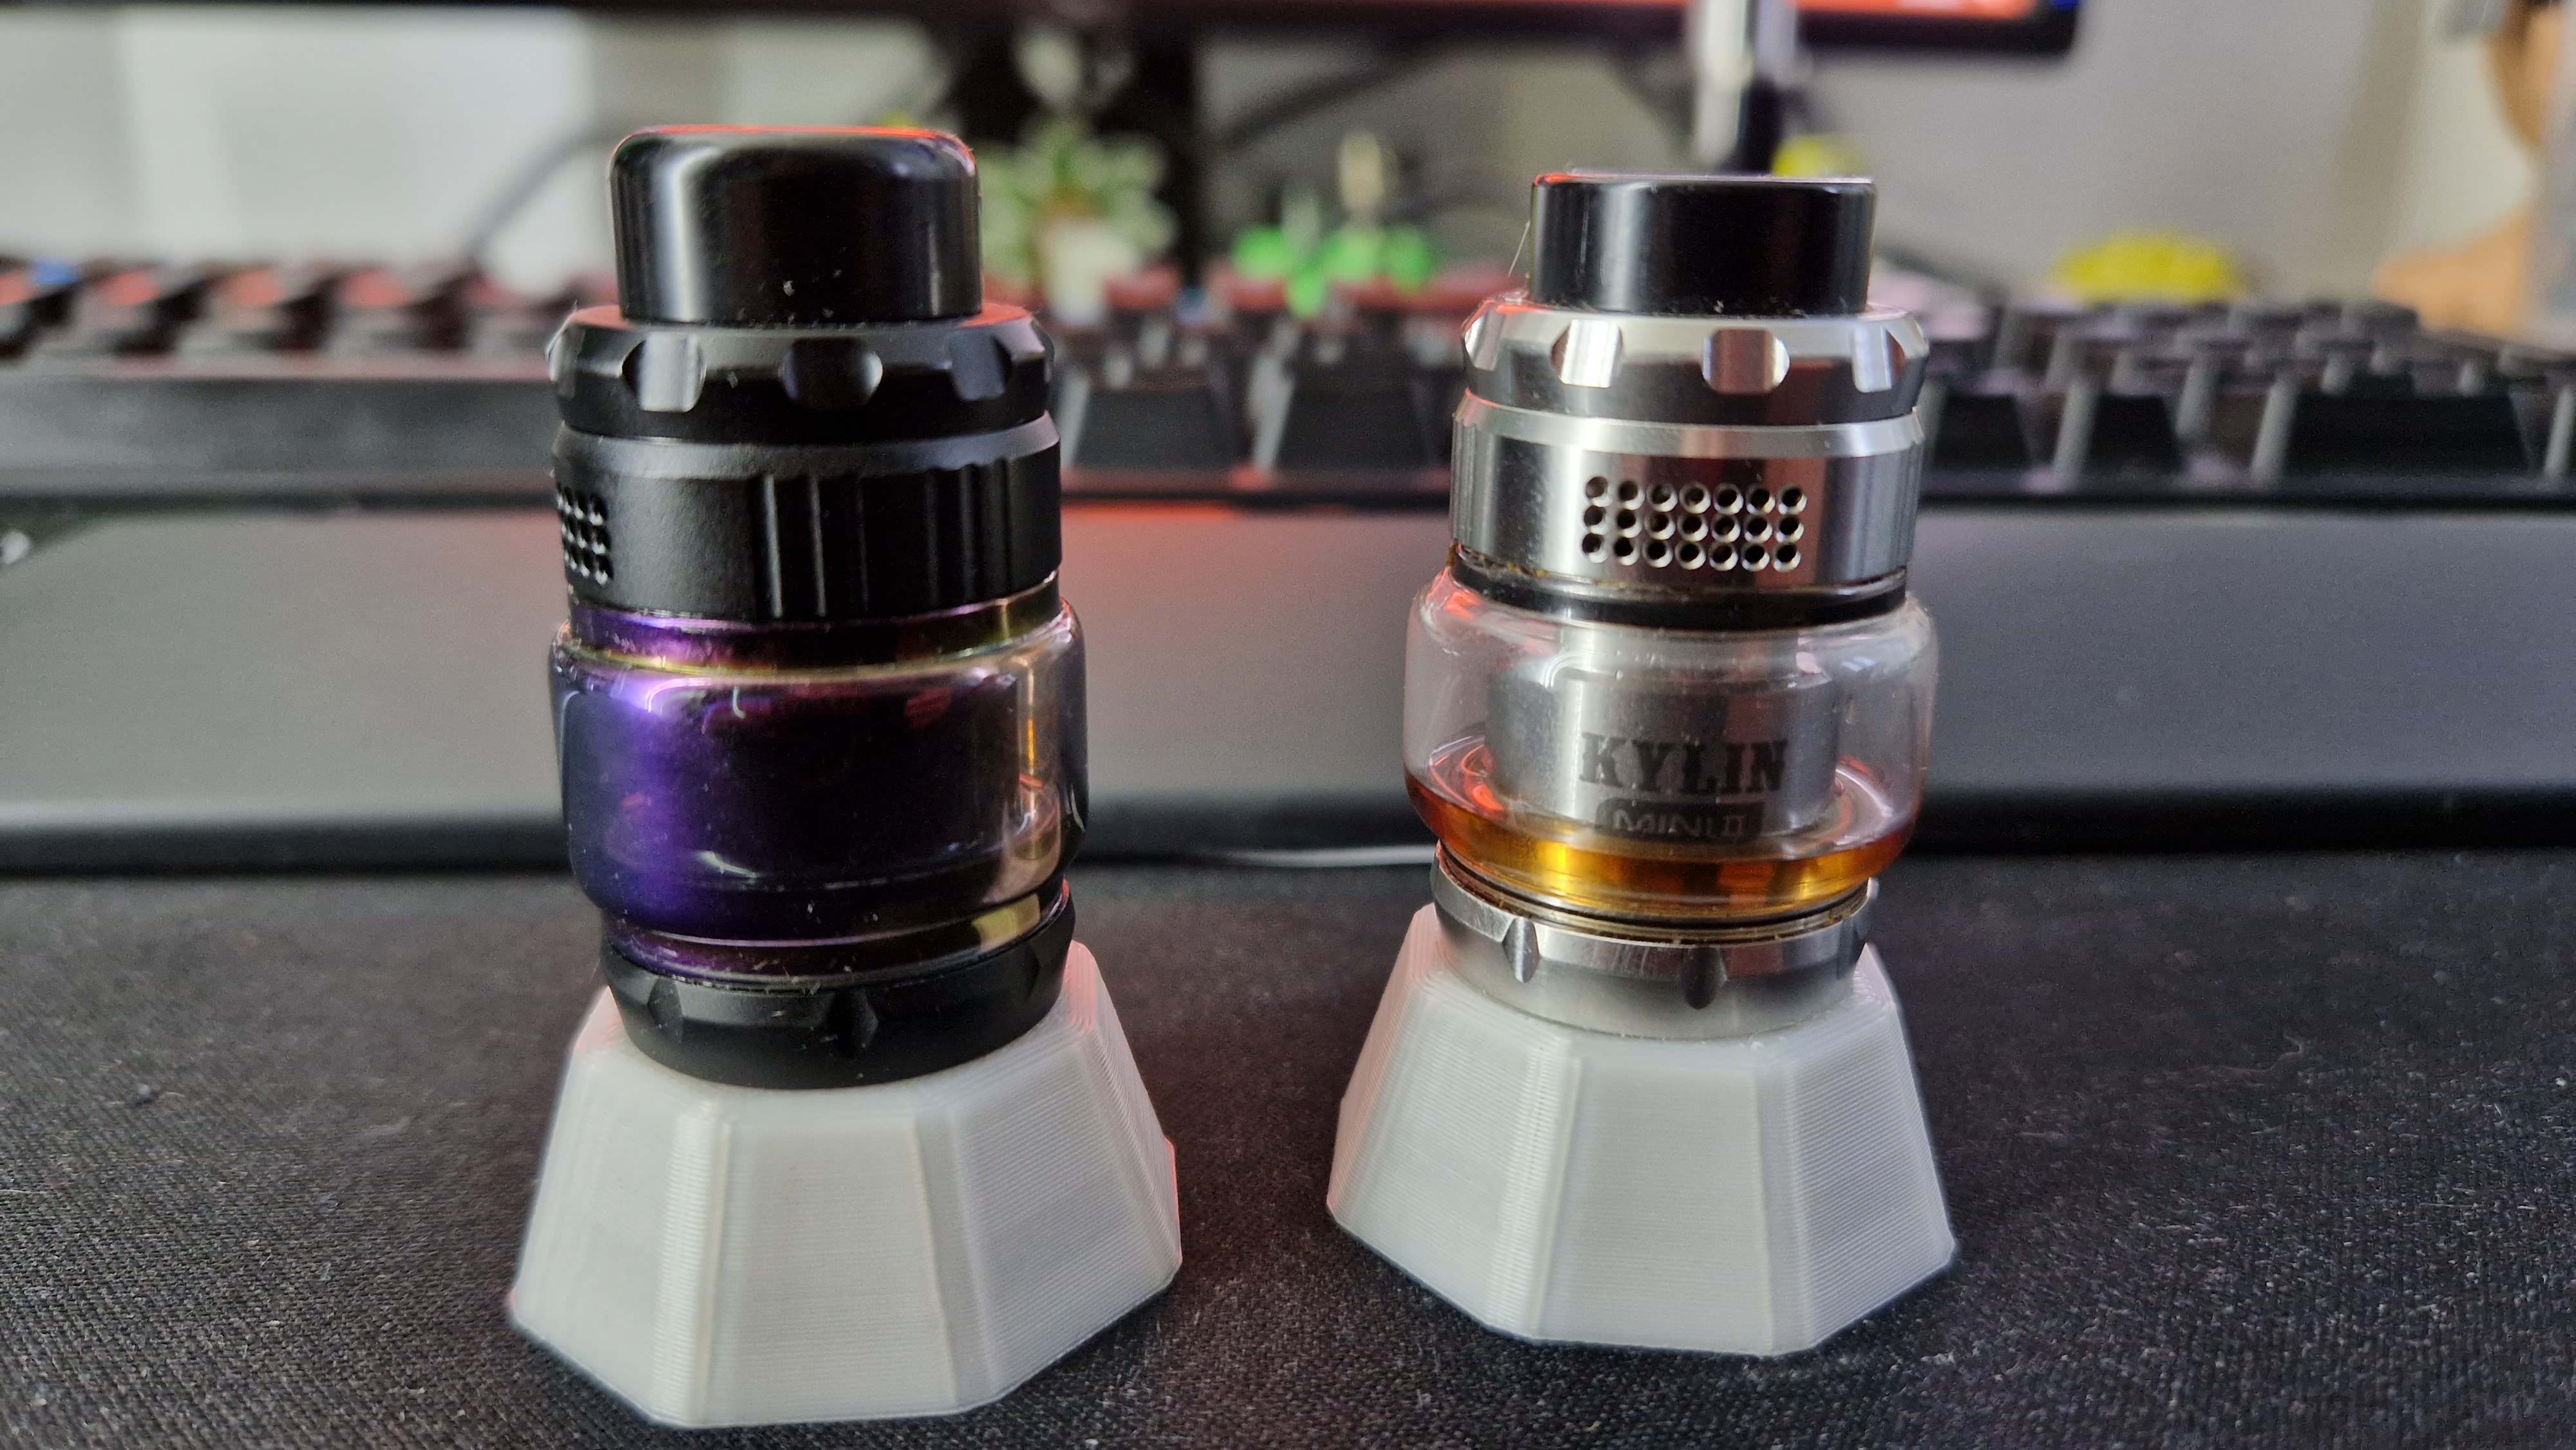 Stand for Atomizer